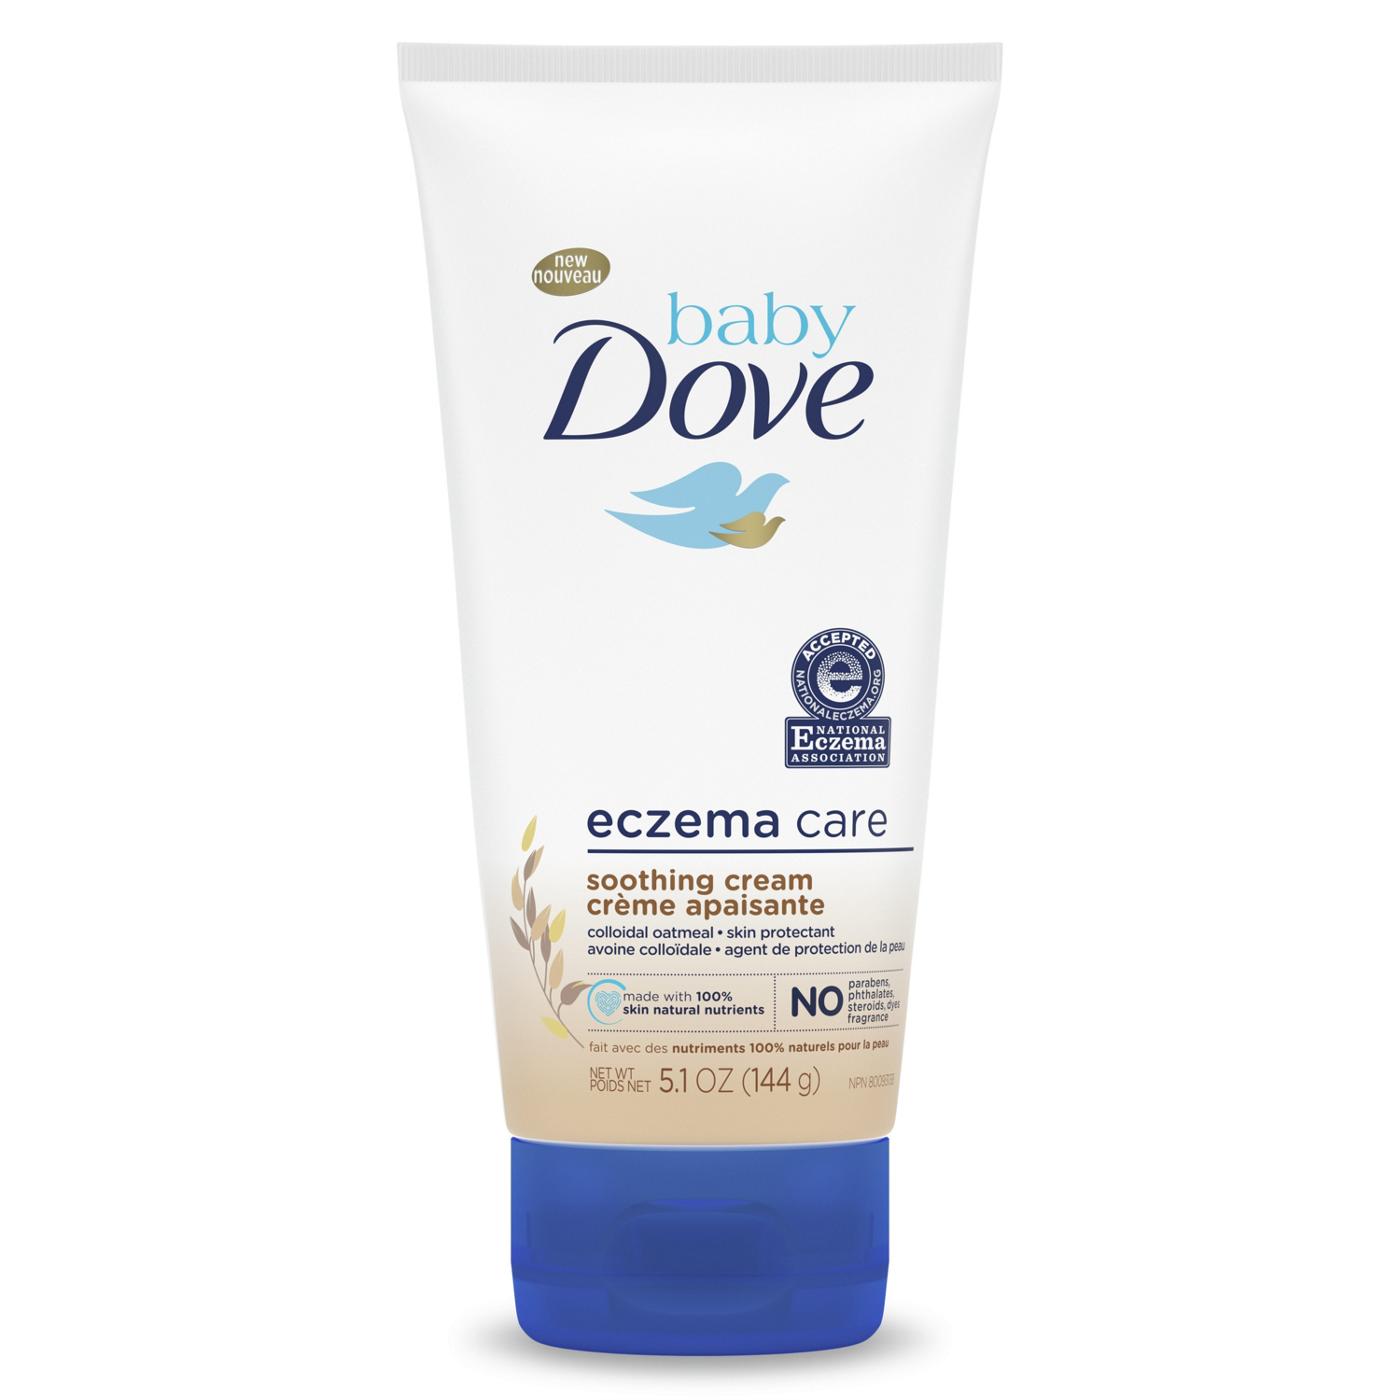 Baby Dove Eczema Care Soothing Cream; image 1 of 5